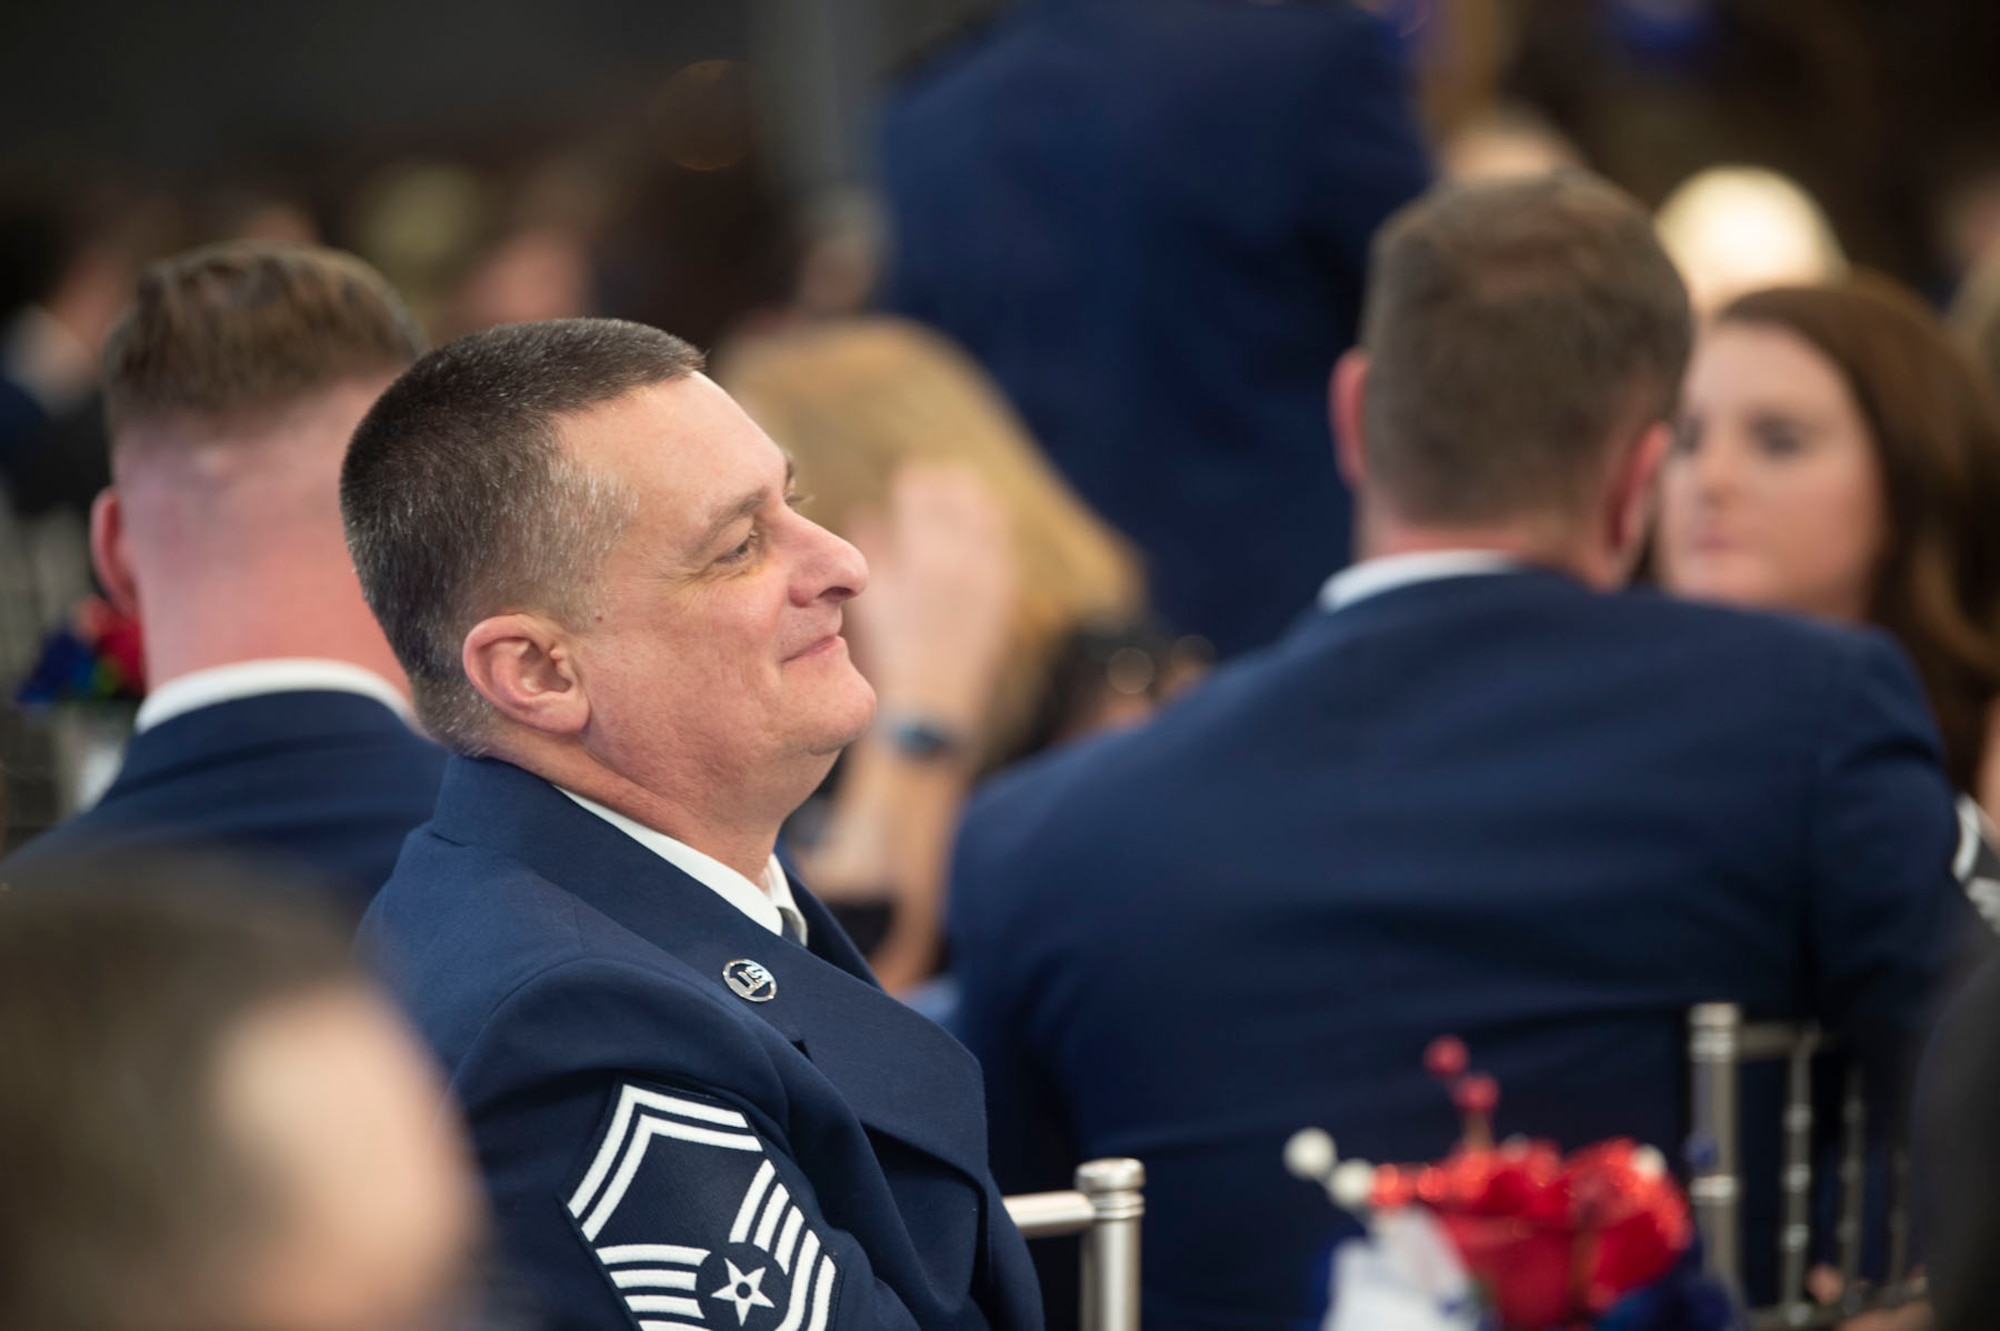 Senior Master Sgt. Mike Johnting, 434th Maintenance Squadron, looks on during the 80th Anniversary Ball program. The wing celebrated both the unit, and the base's long history and announced its annual award winners. Photo by Master Sgt. Rachel Barton.